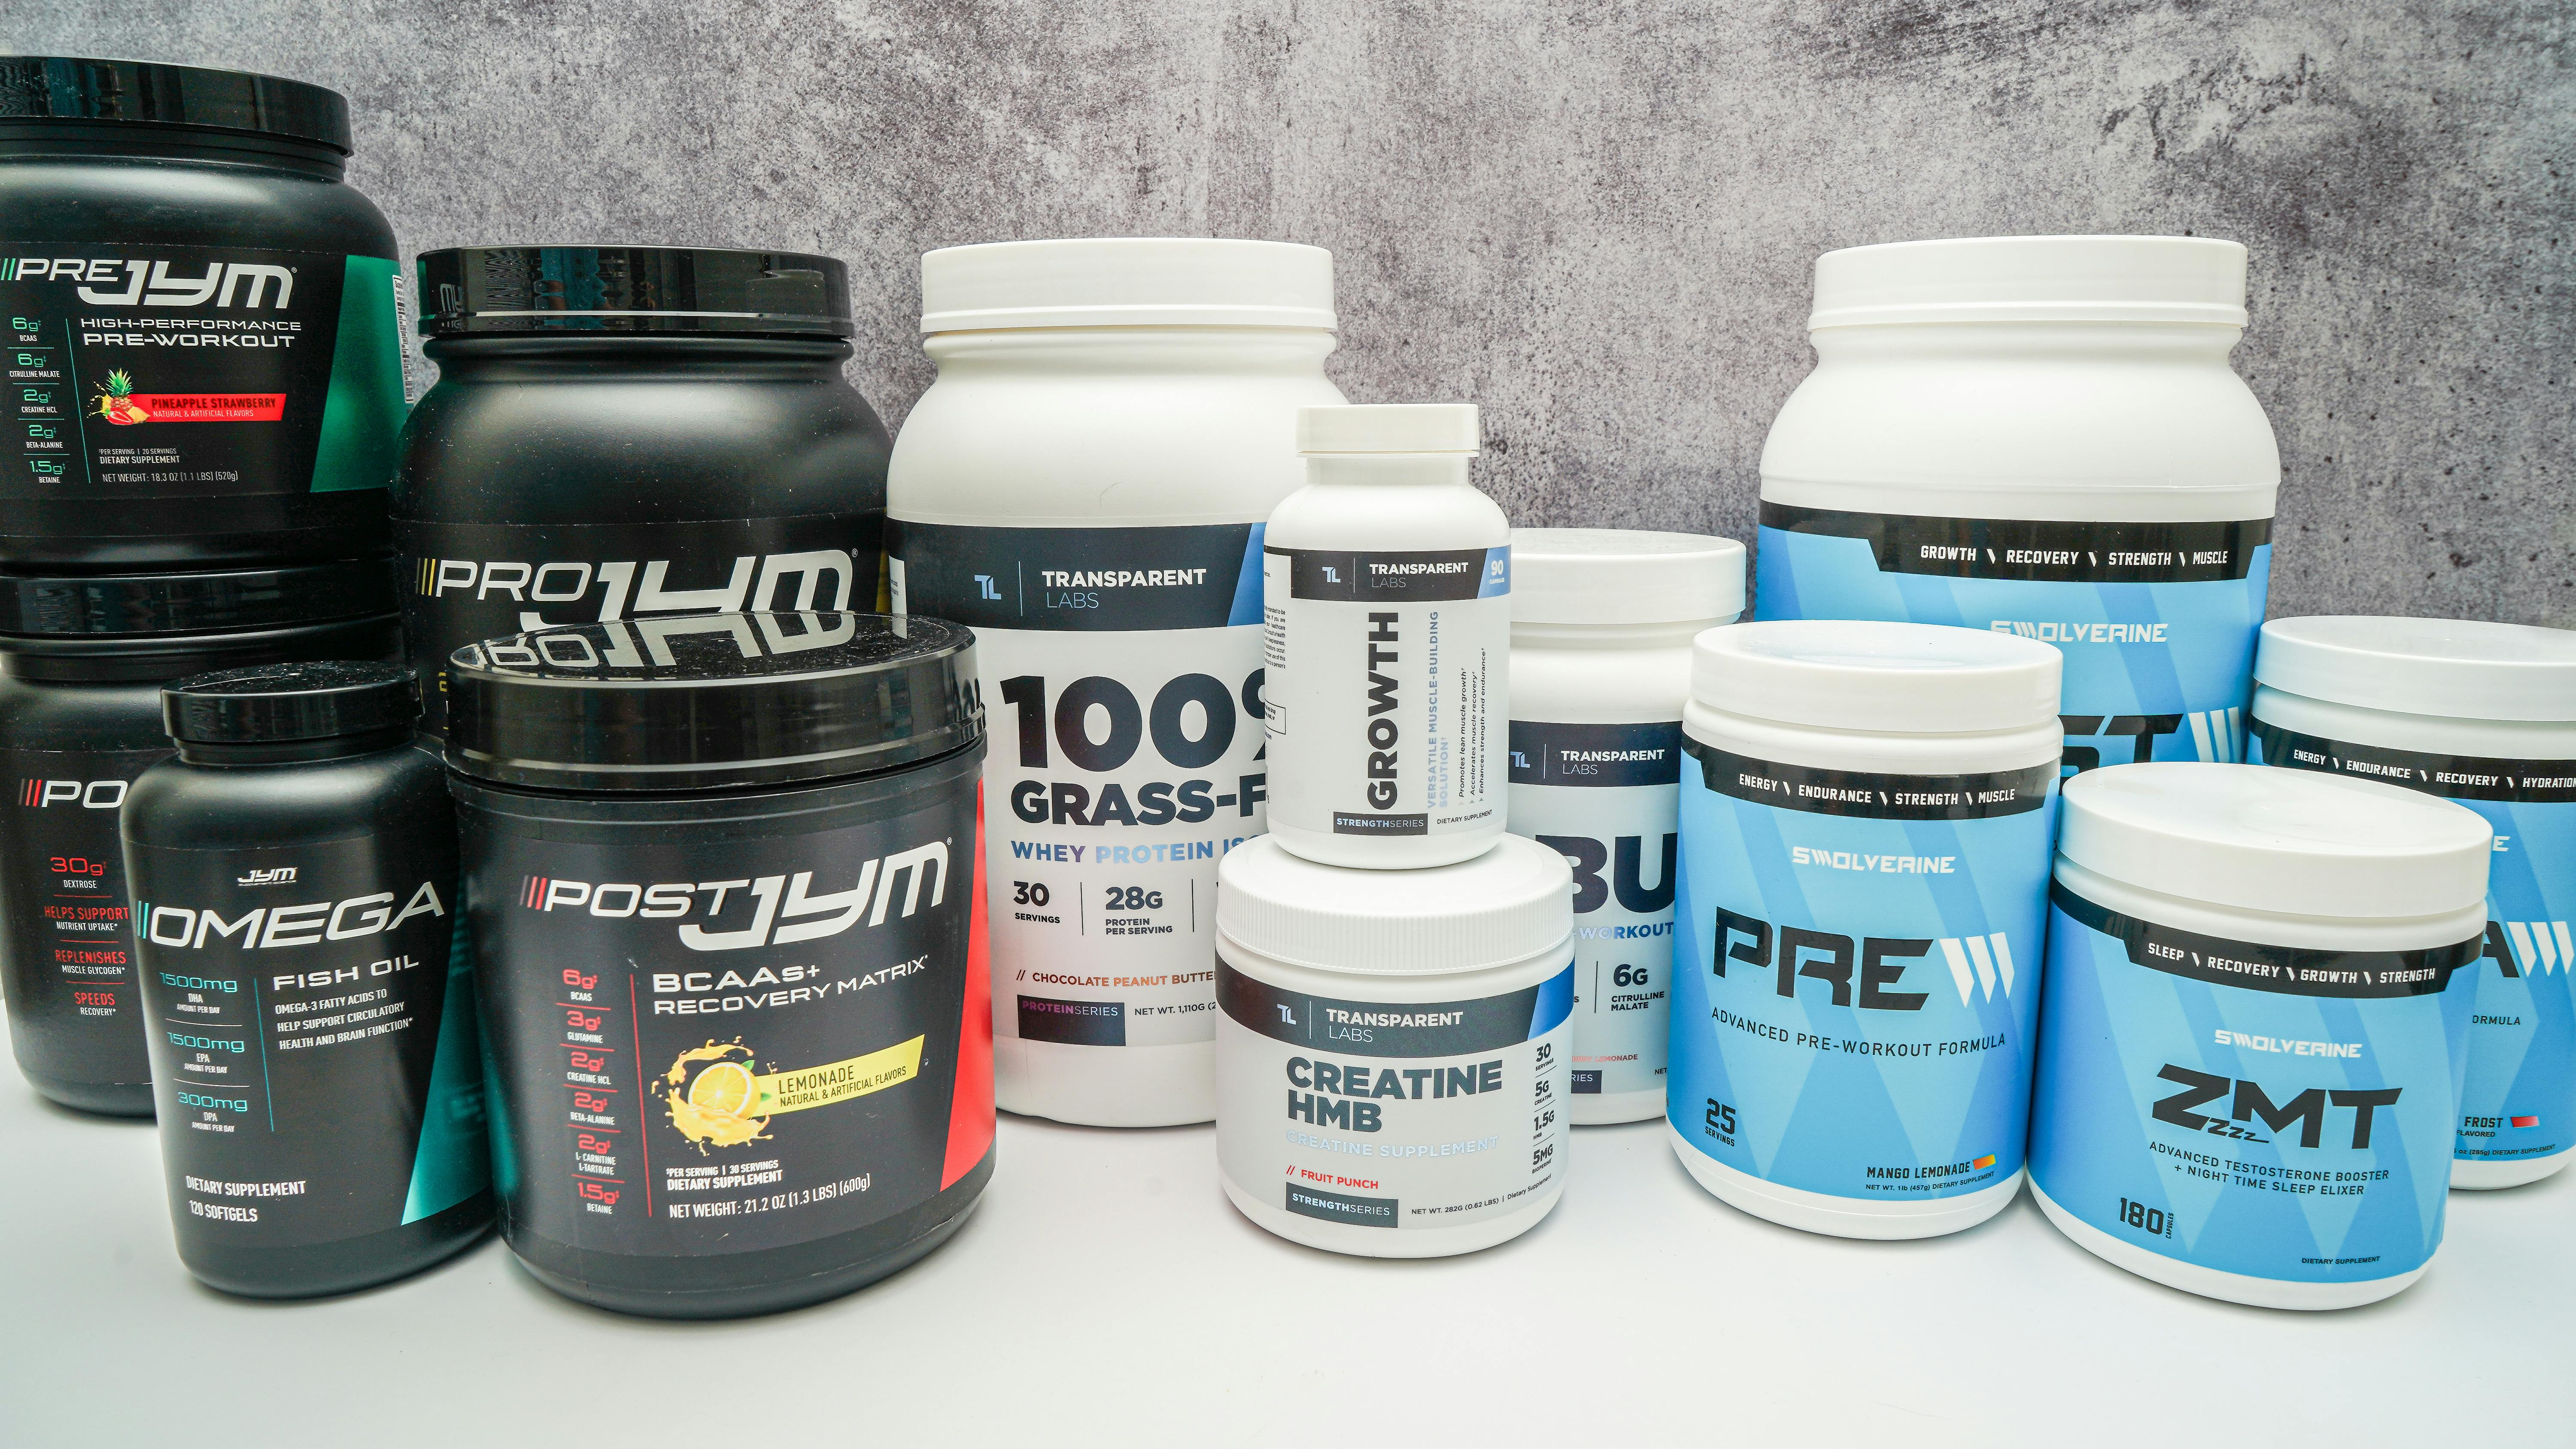 The Classic  Fun workouts, Pre workout protein, Post workout supplements